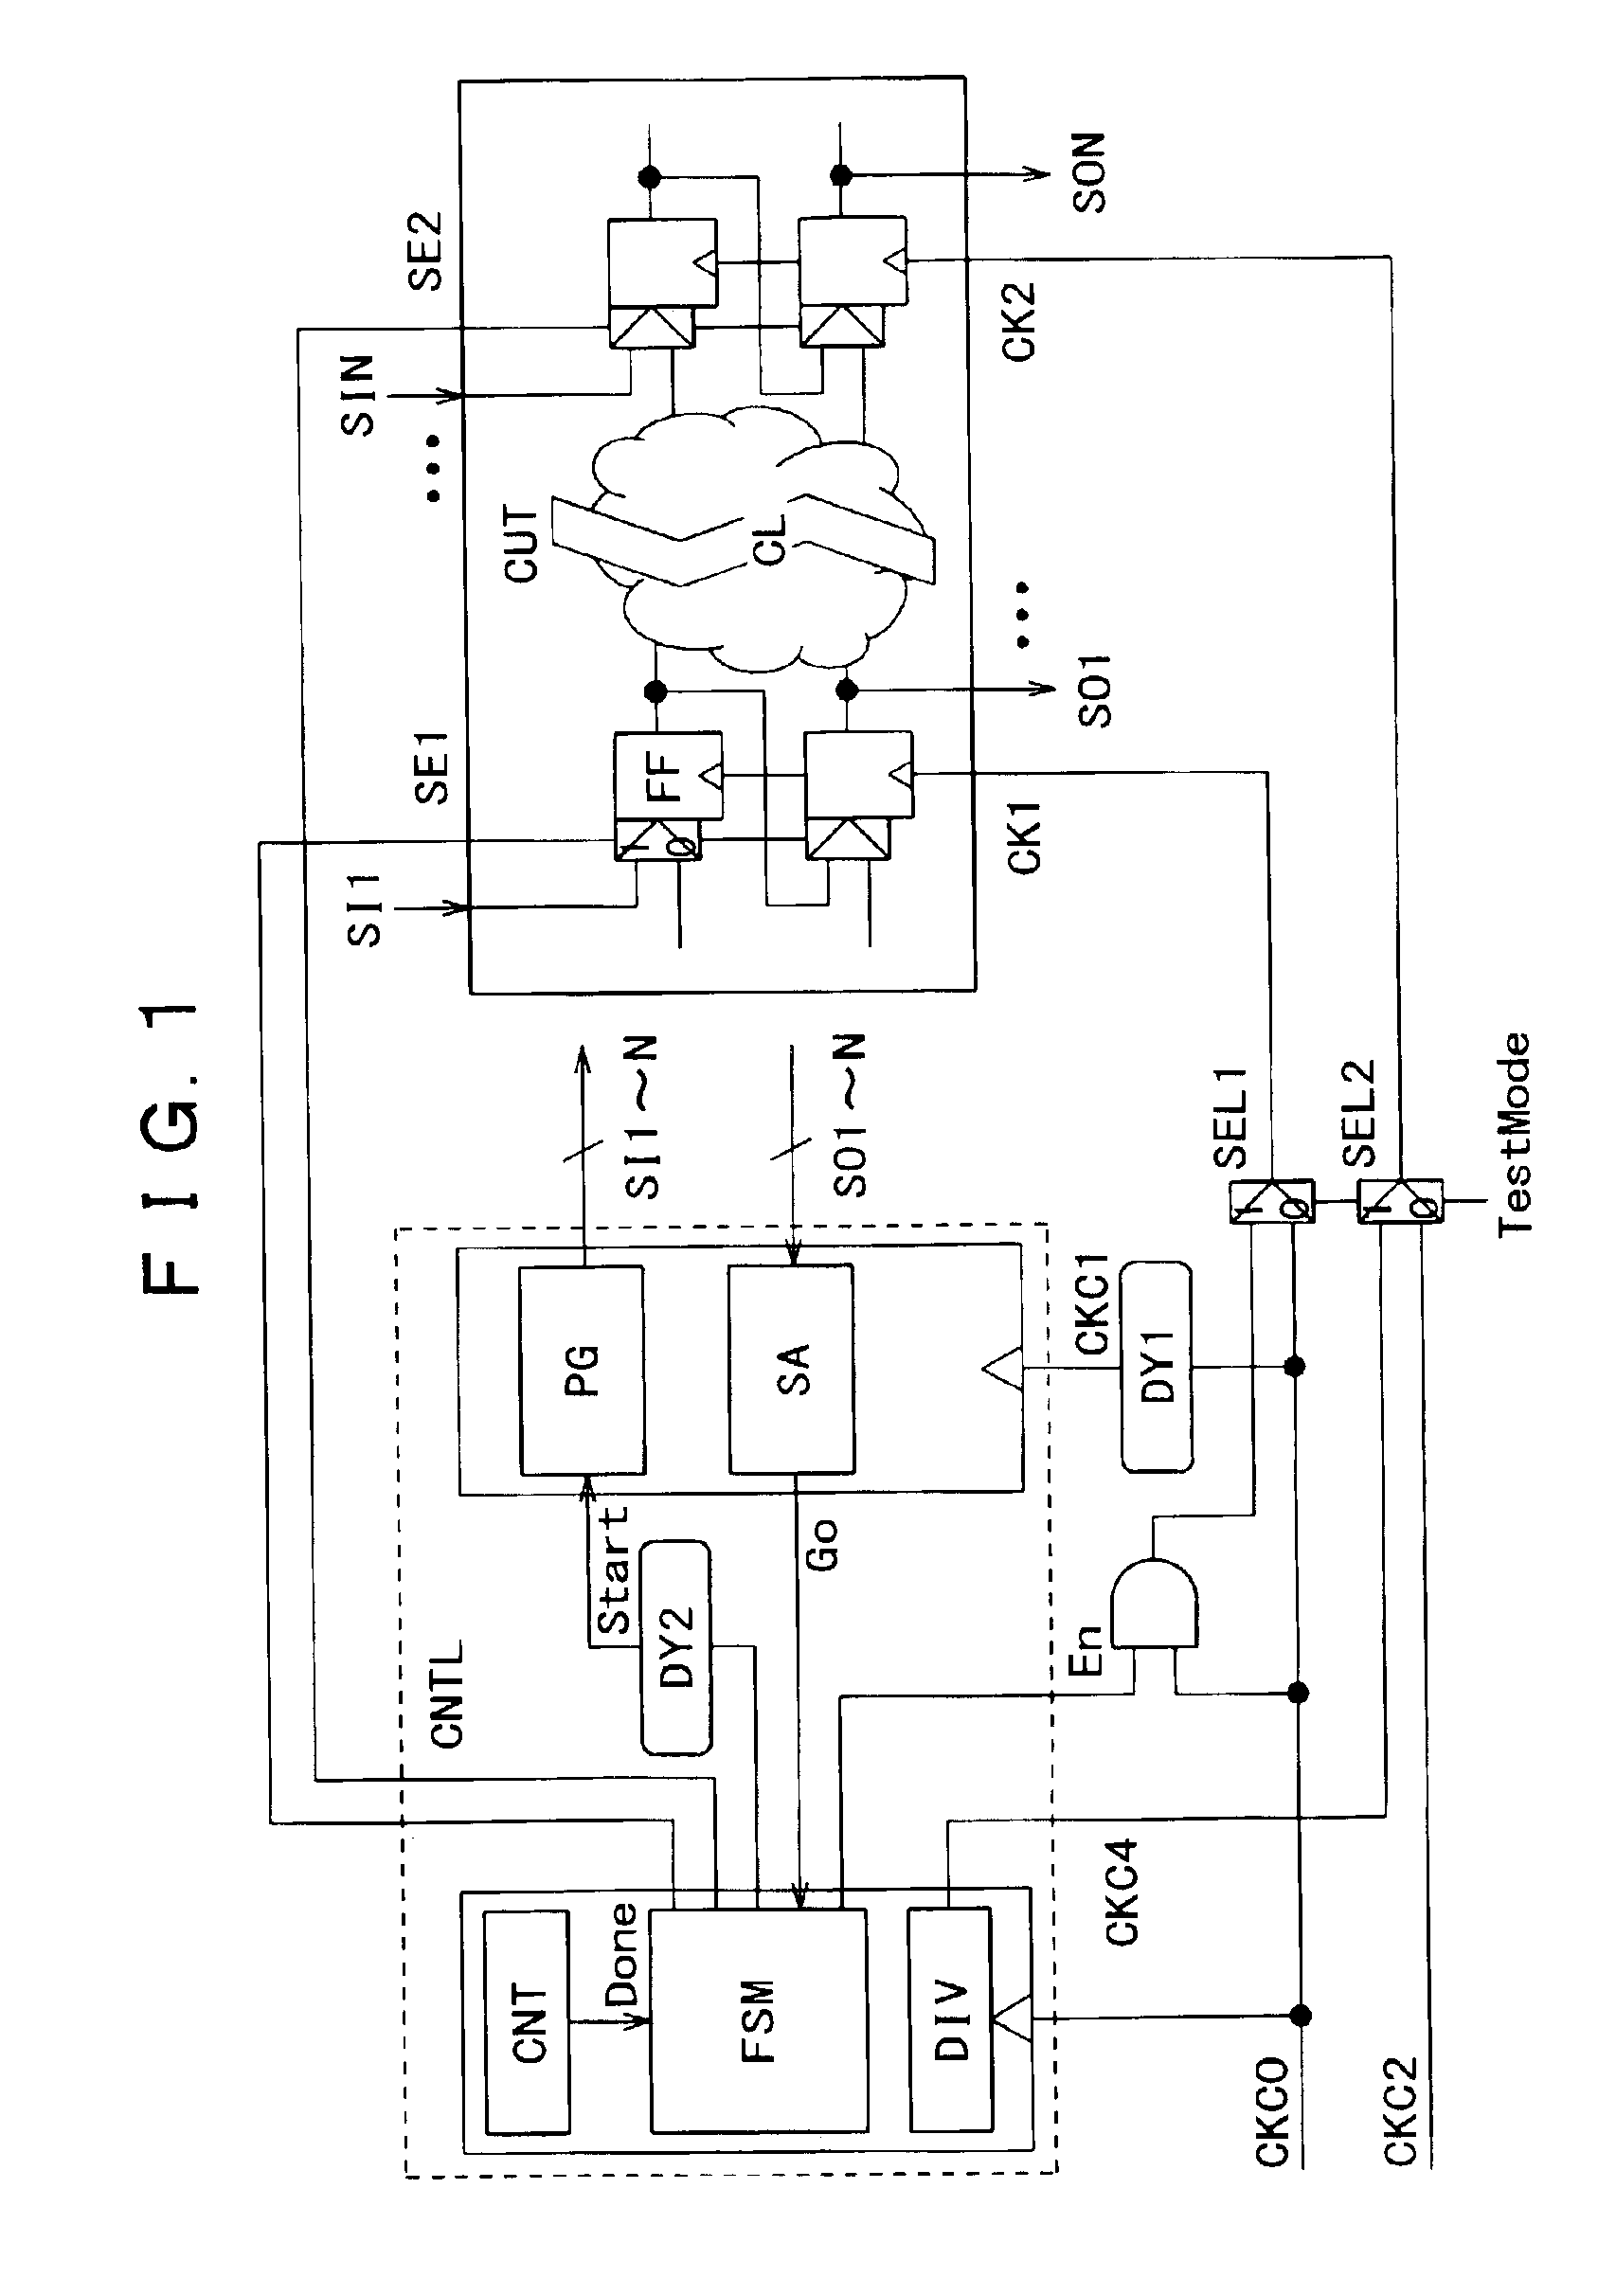 Semiconductor integrated circuit and its design methodology